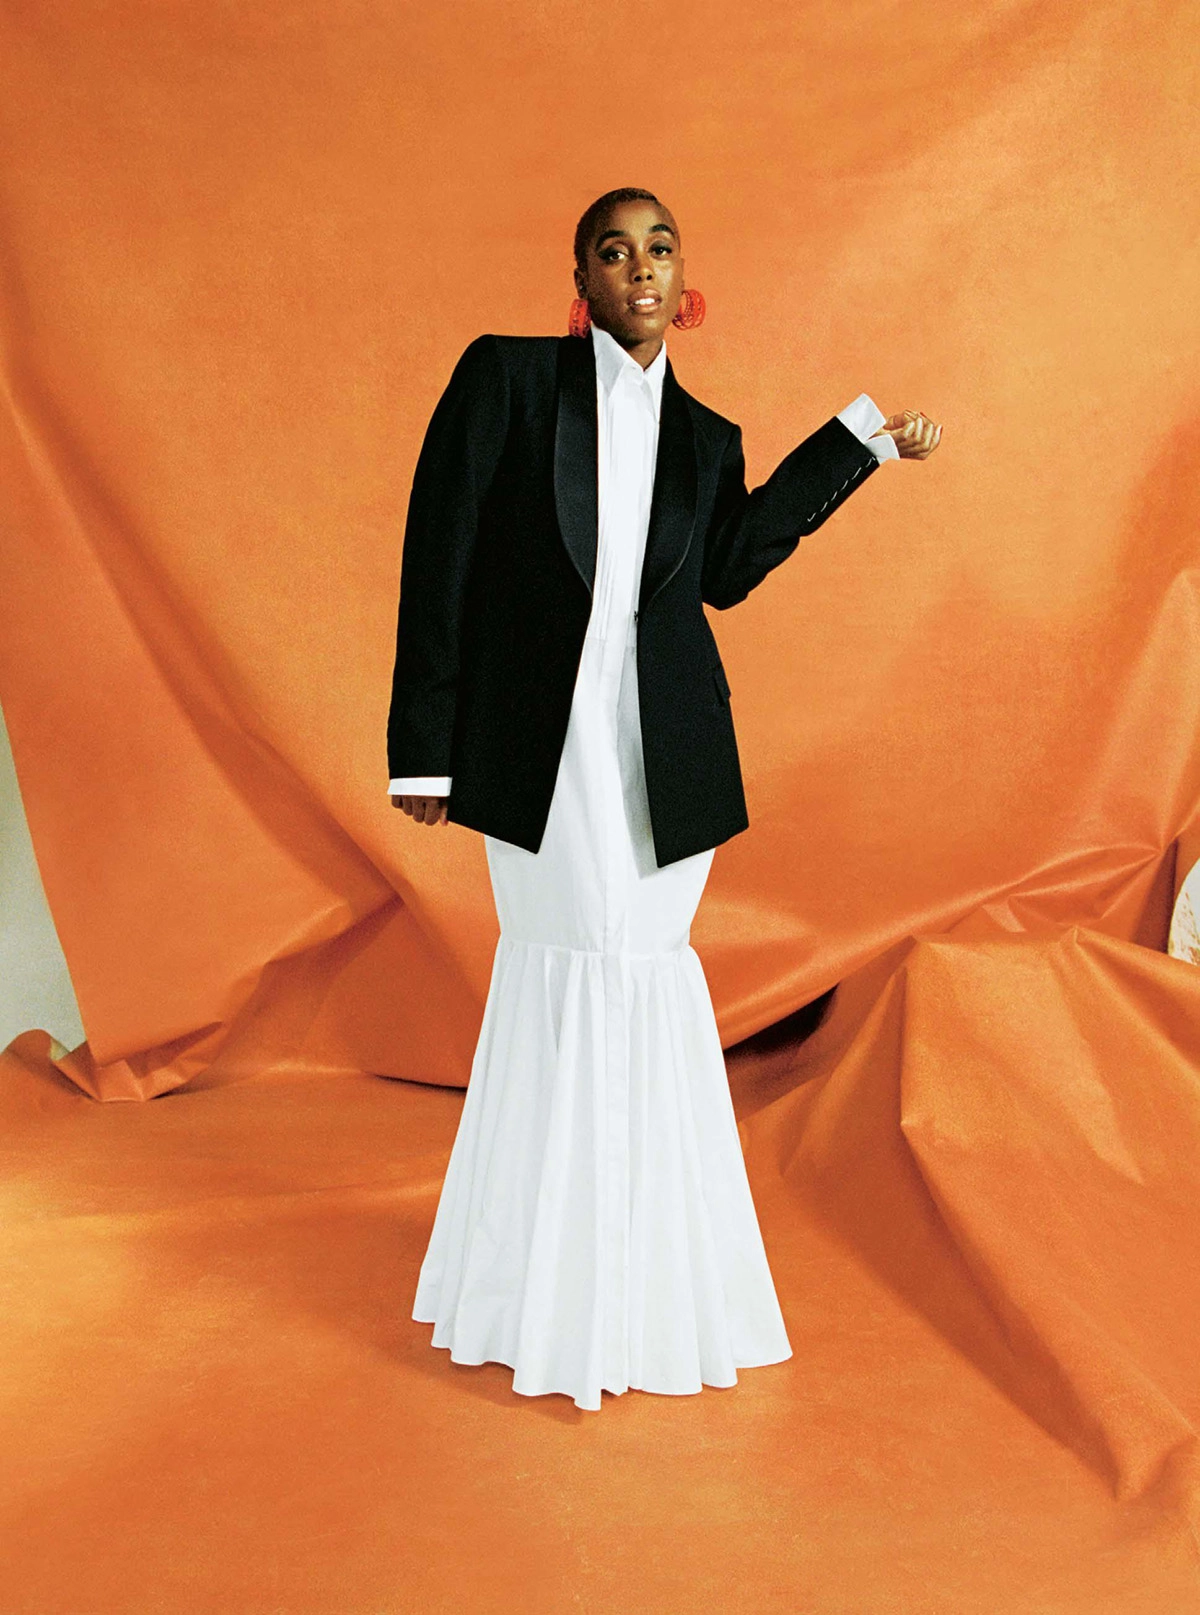 Lashana Lynch covers The Sunday Times Style October 2nd, 2022 by Rosaline Shahnavaz